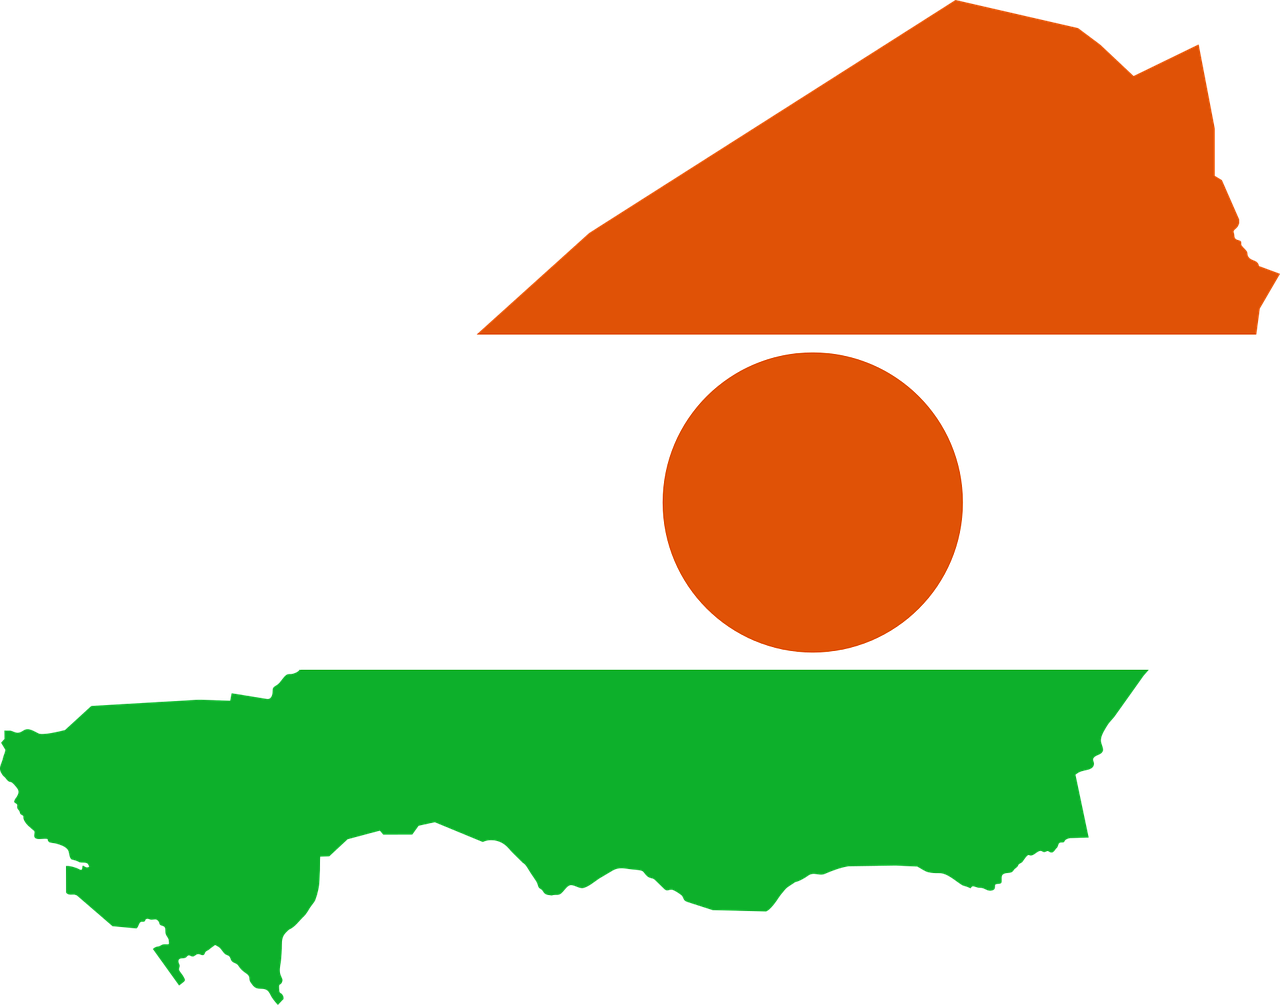 niger-gc7a991a77_1280.png